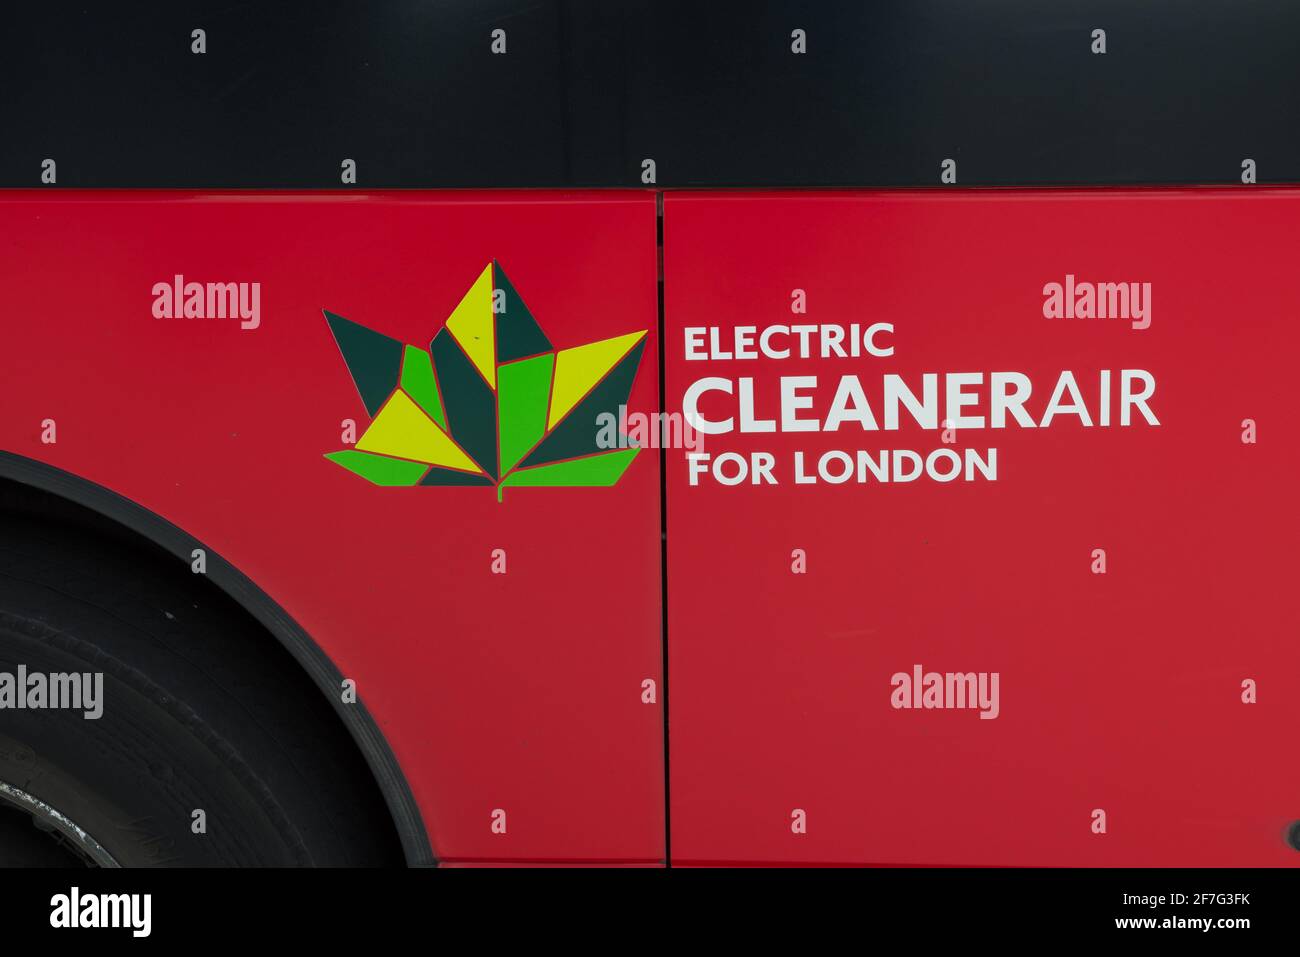 Cleaner Air for London logo and caption on side of an electric powered London bus. Stock Photo